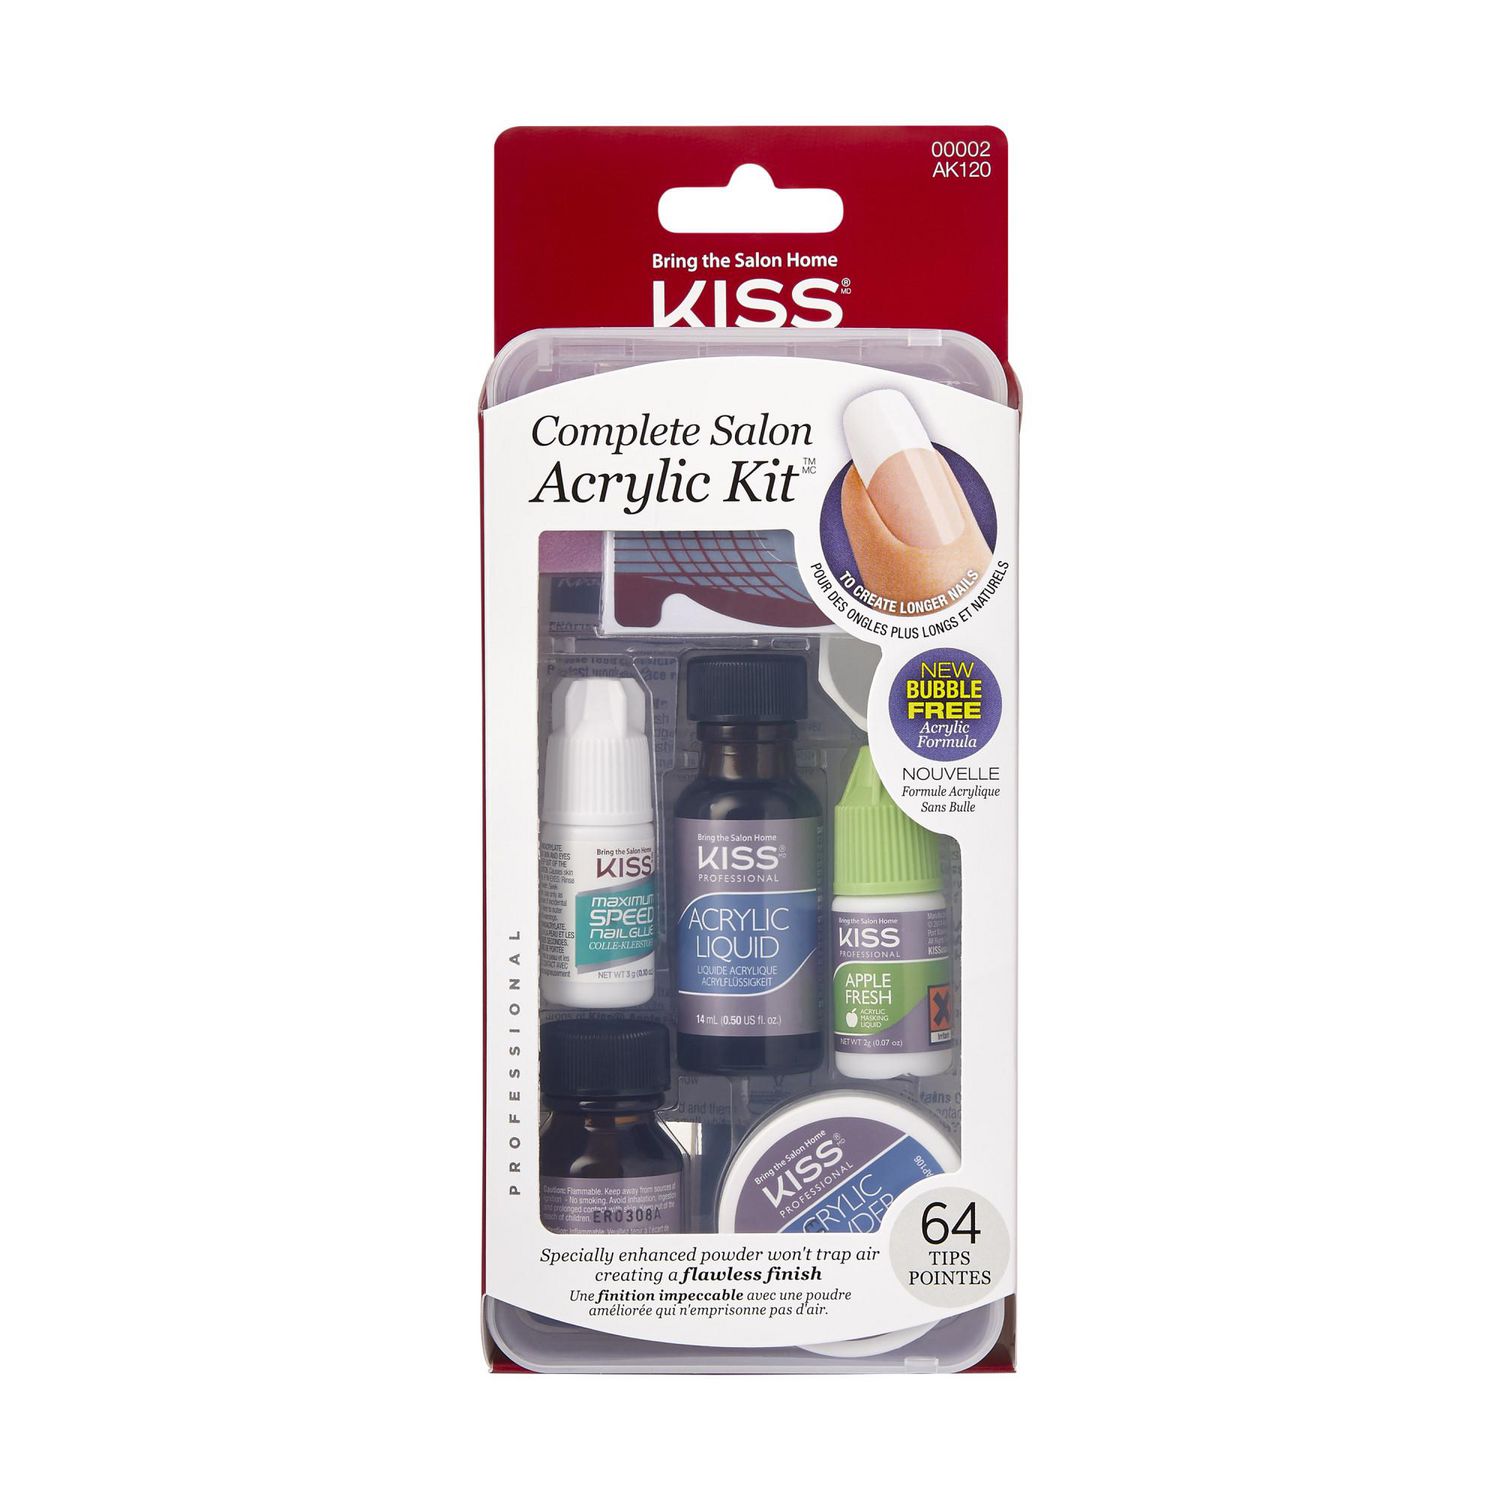 KISS Complete Salon Acrylic Kit | Pick Up In Store TODAY at CVS